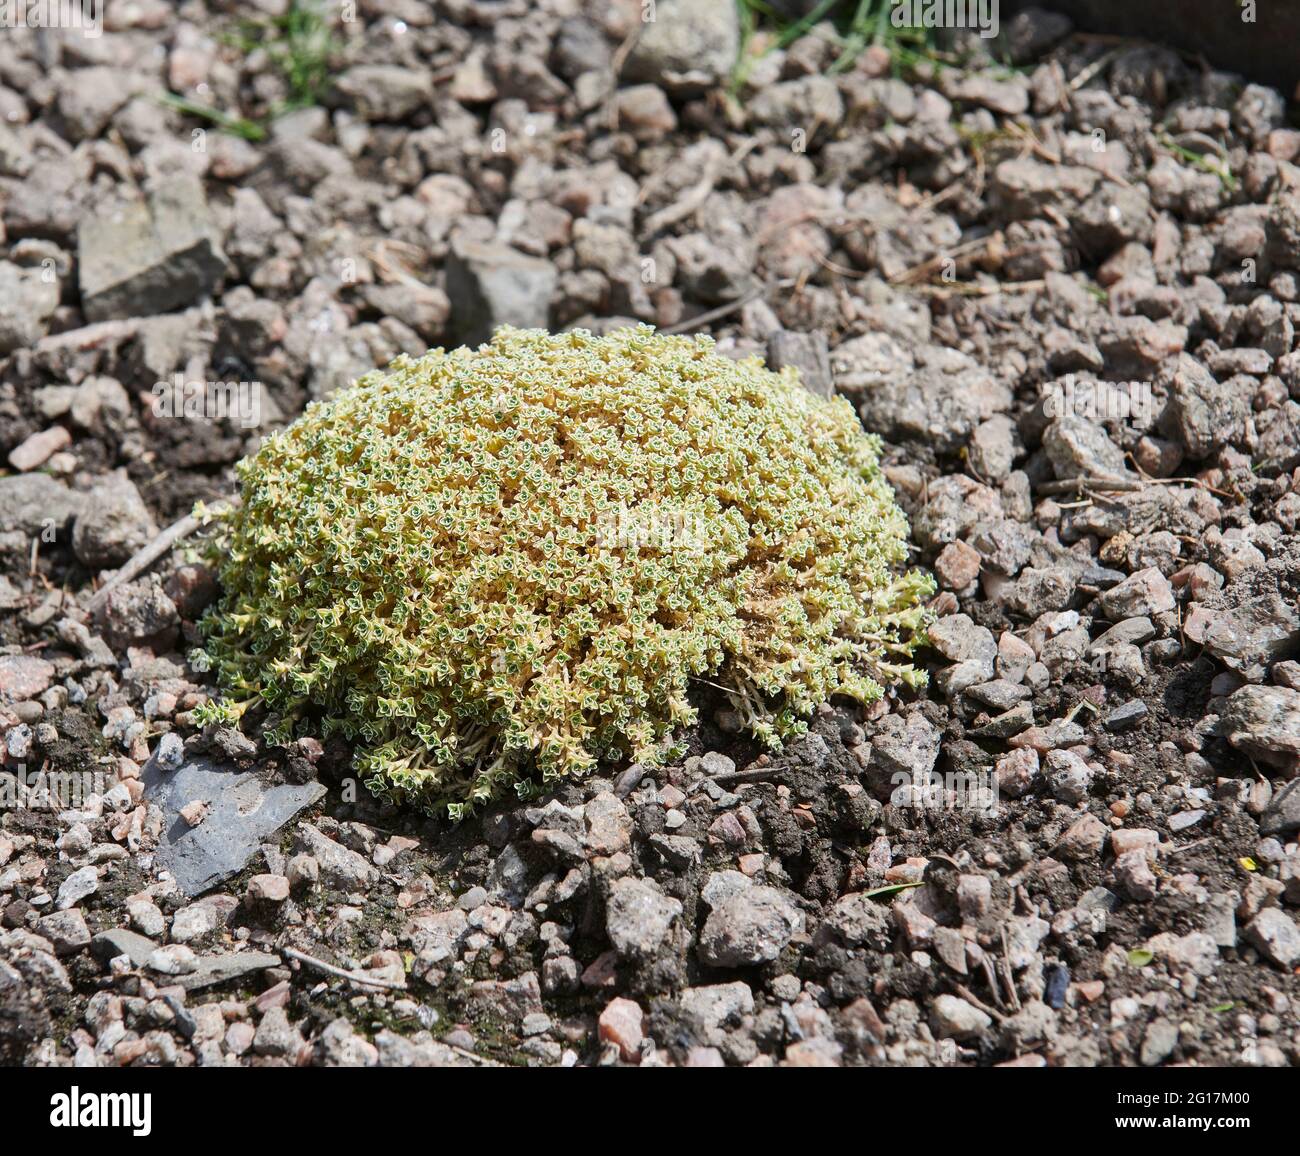 Mossy saxifrage (Saxifraga hypnoides) or Dovedale moss, growing on alpine limestone gravel in full sunlight. Stock Photo